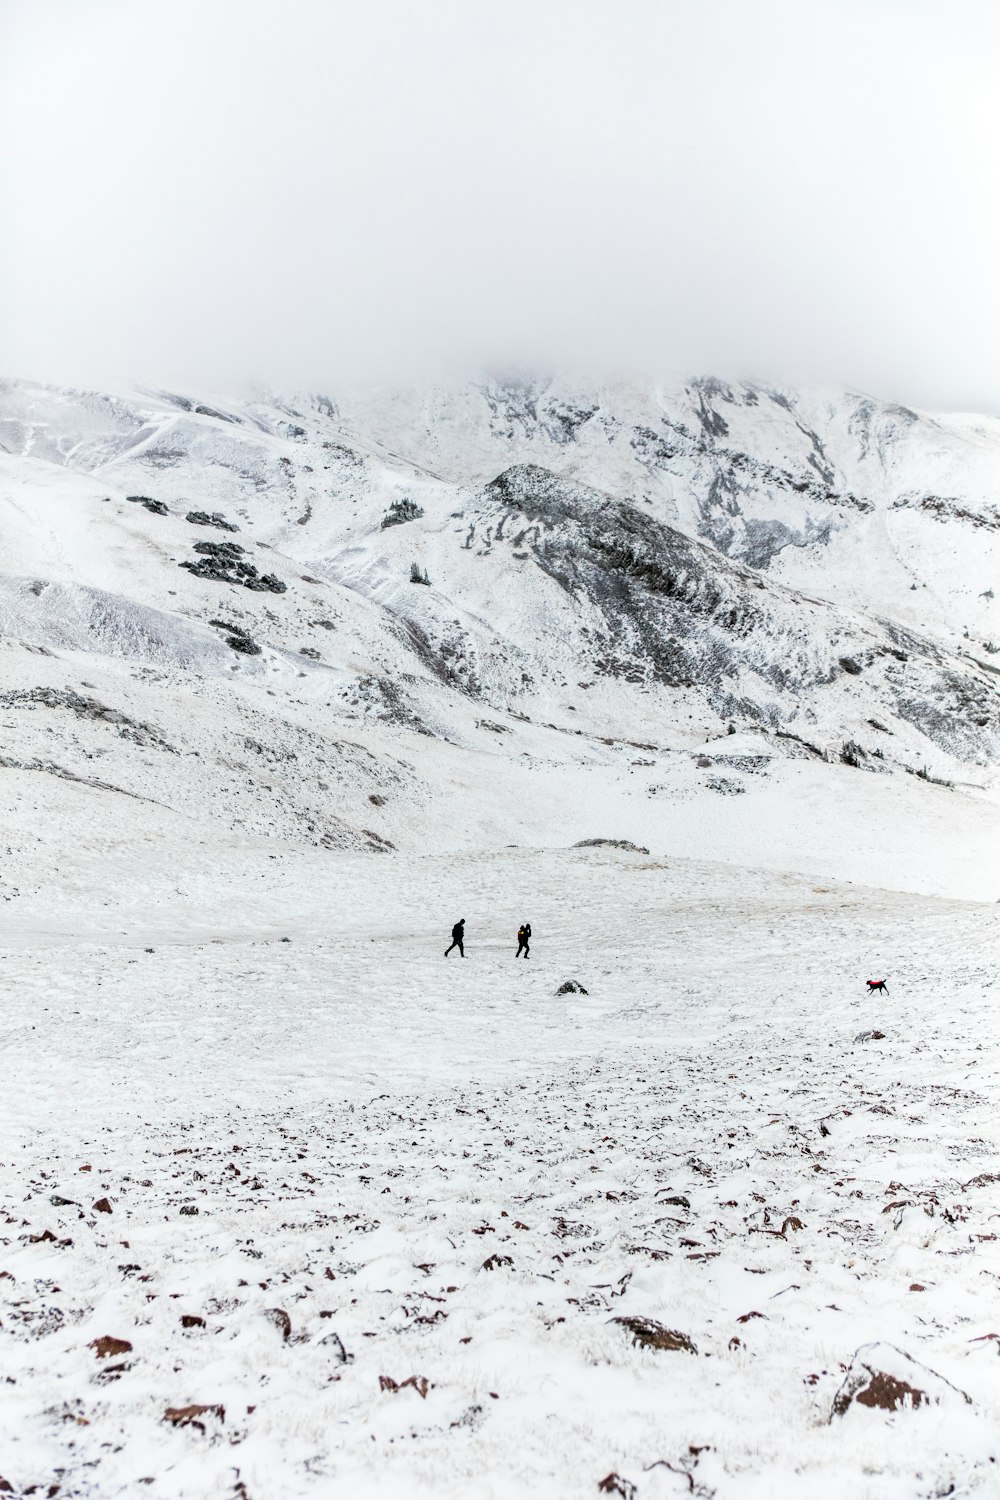 two people walking on snow